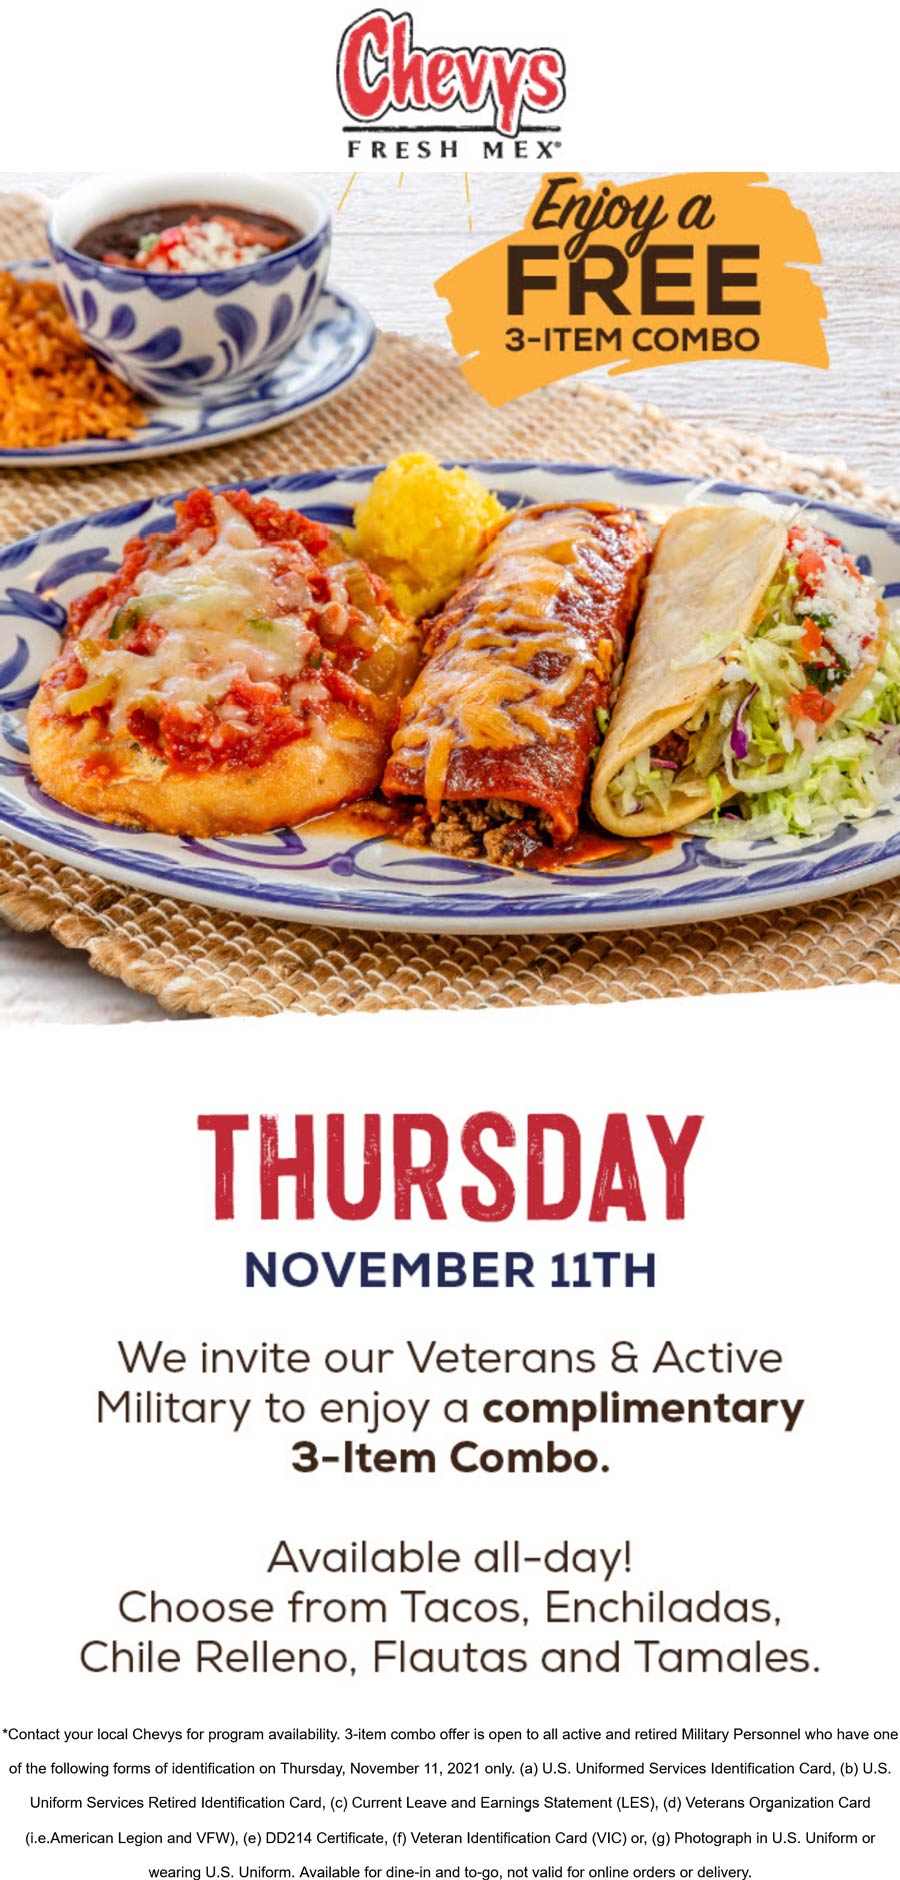 Chevys restaurants Coupon  Vets get a 3-item combo meal free today at Chevys Fresh Mex #chevys 